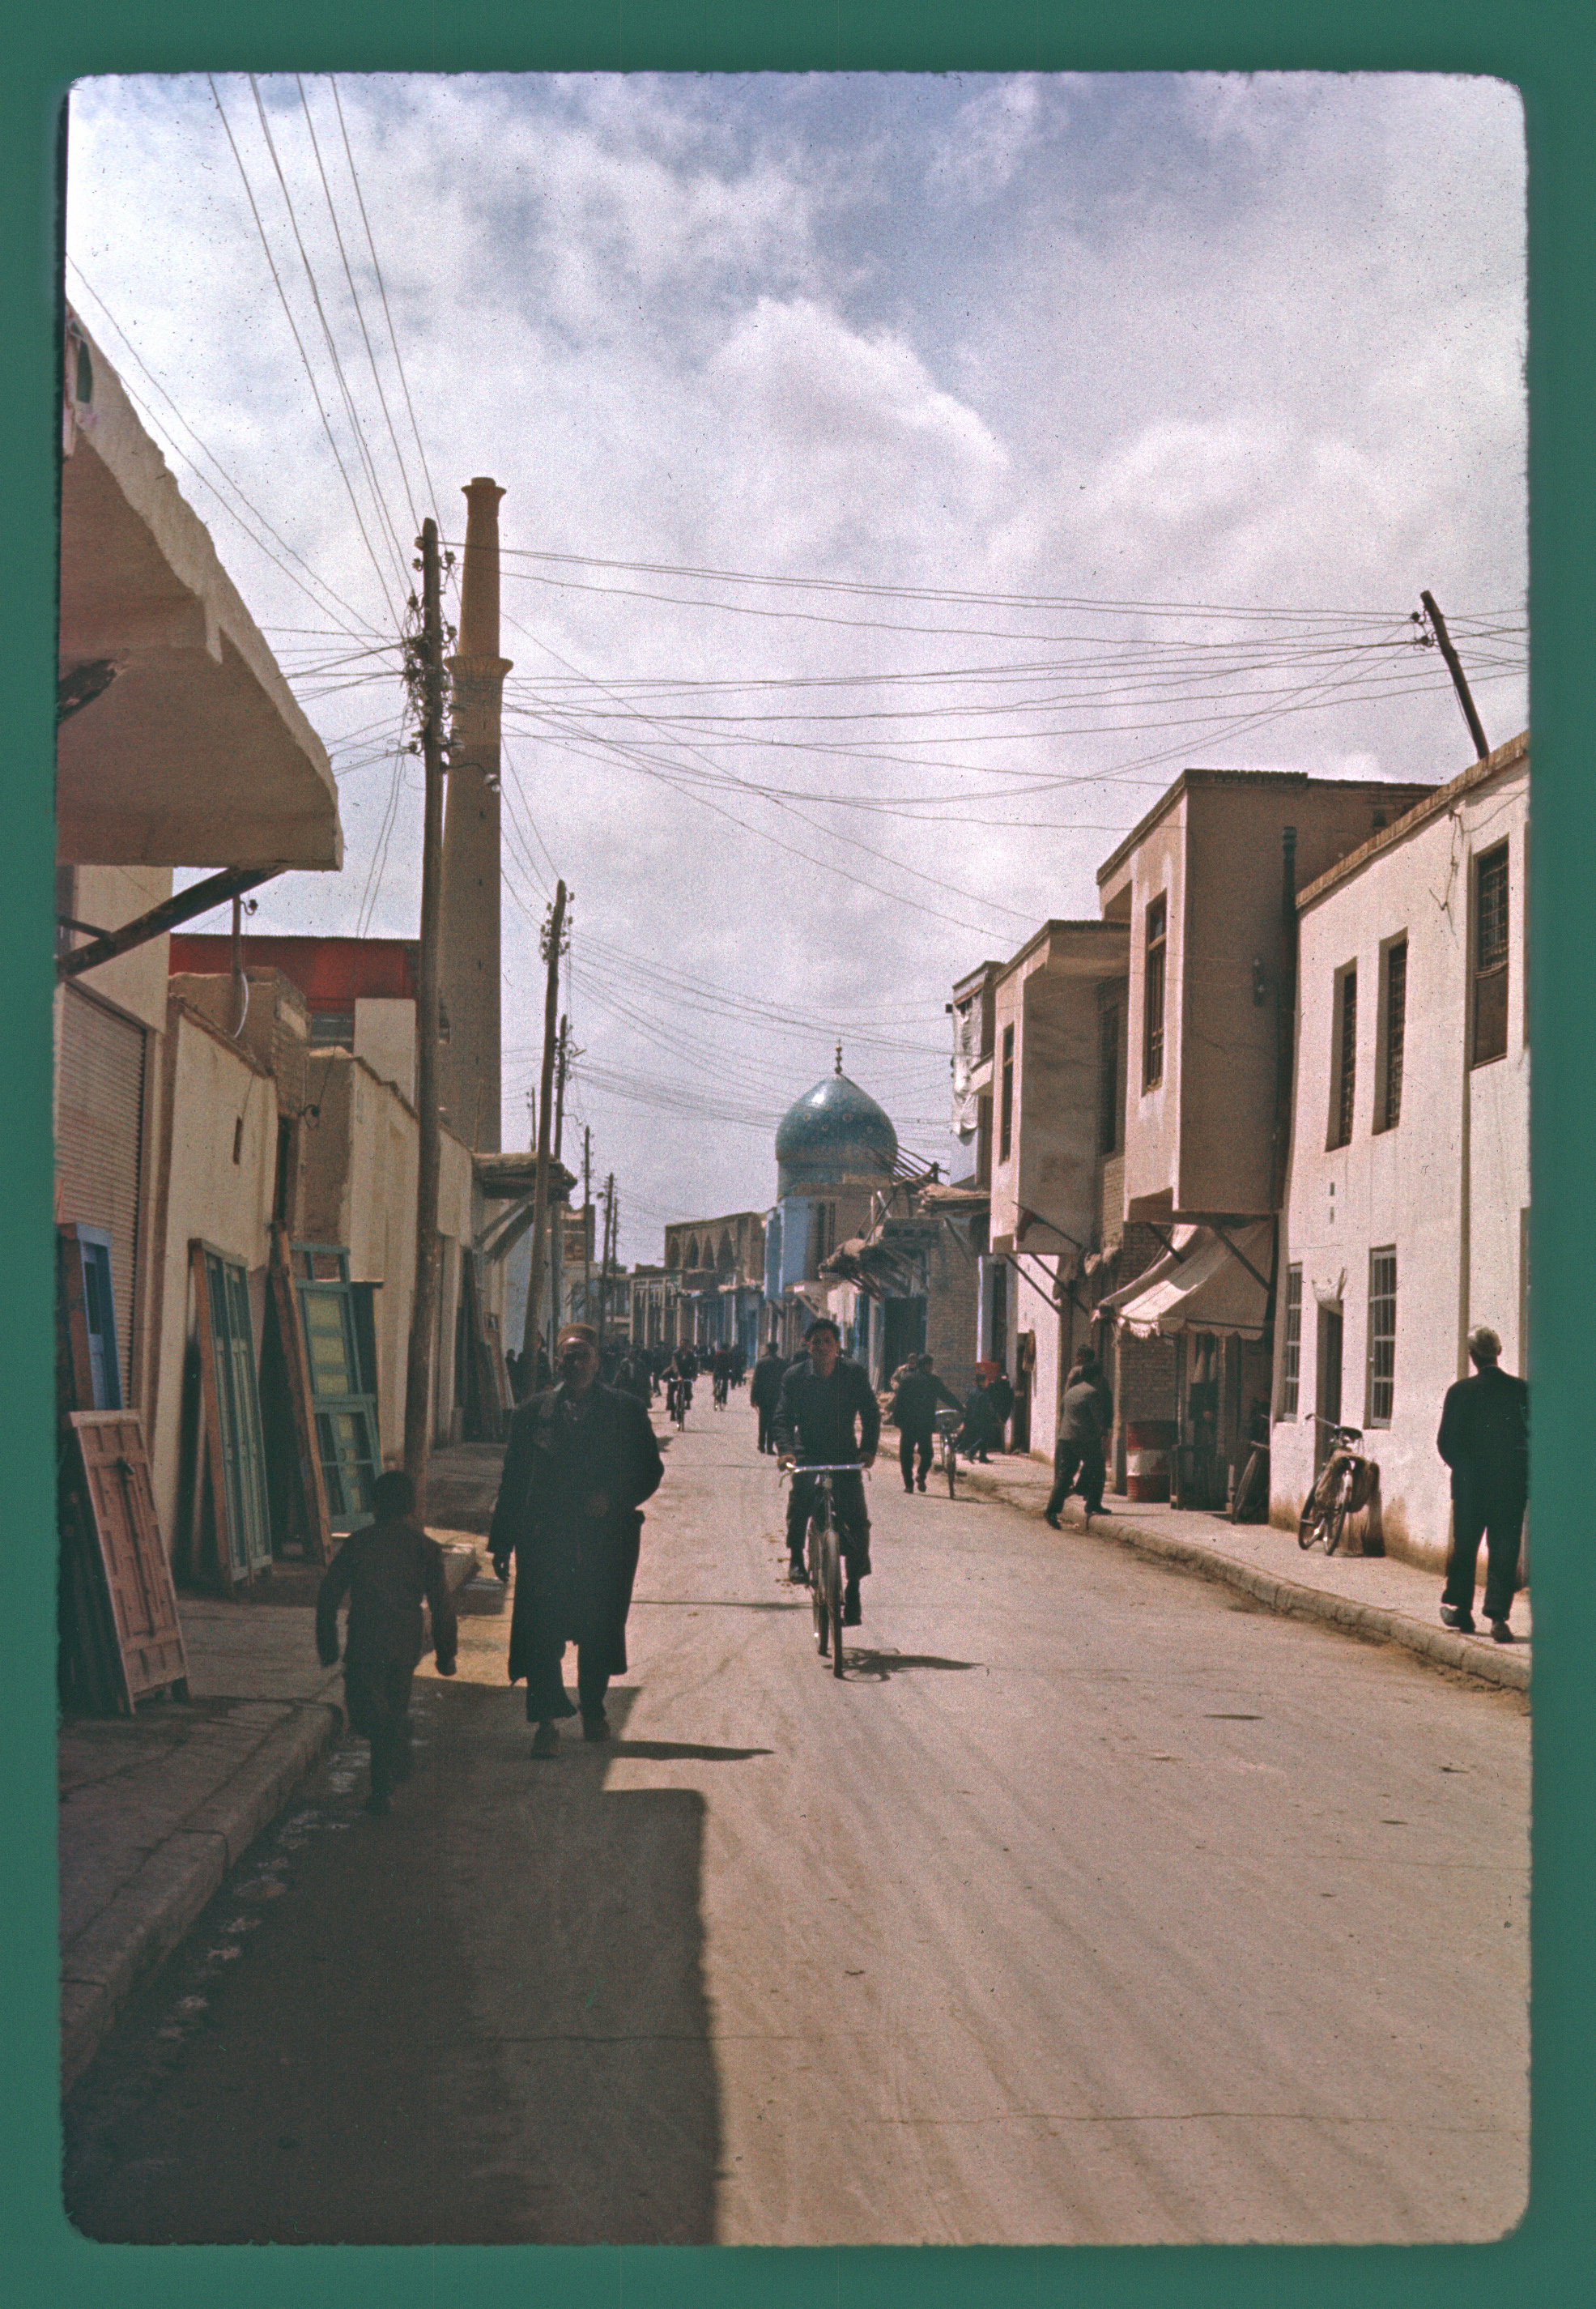 View of a street in Isfahan. The minaret of Masjid-i 'Ali and dome of adjacent Harun-i Vilayat Shrine are visible in background.